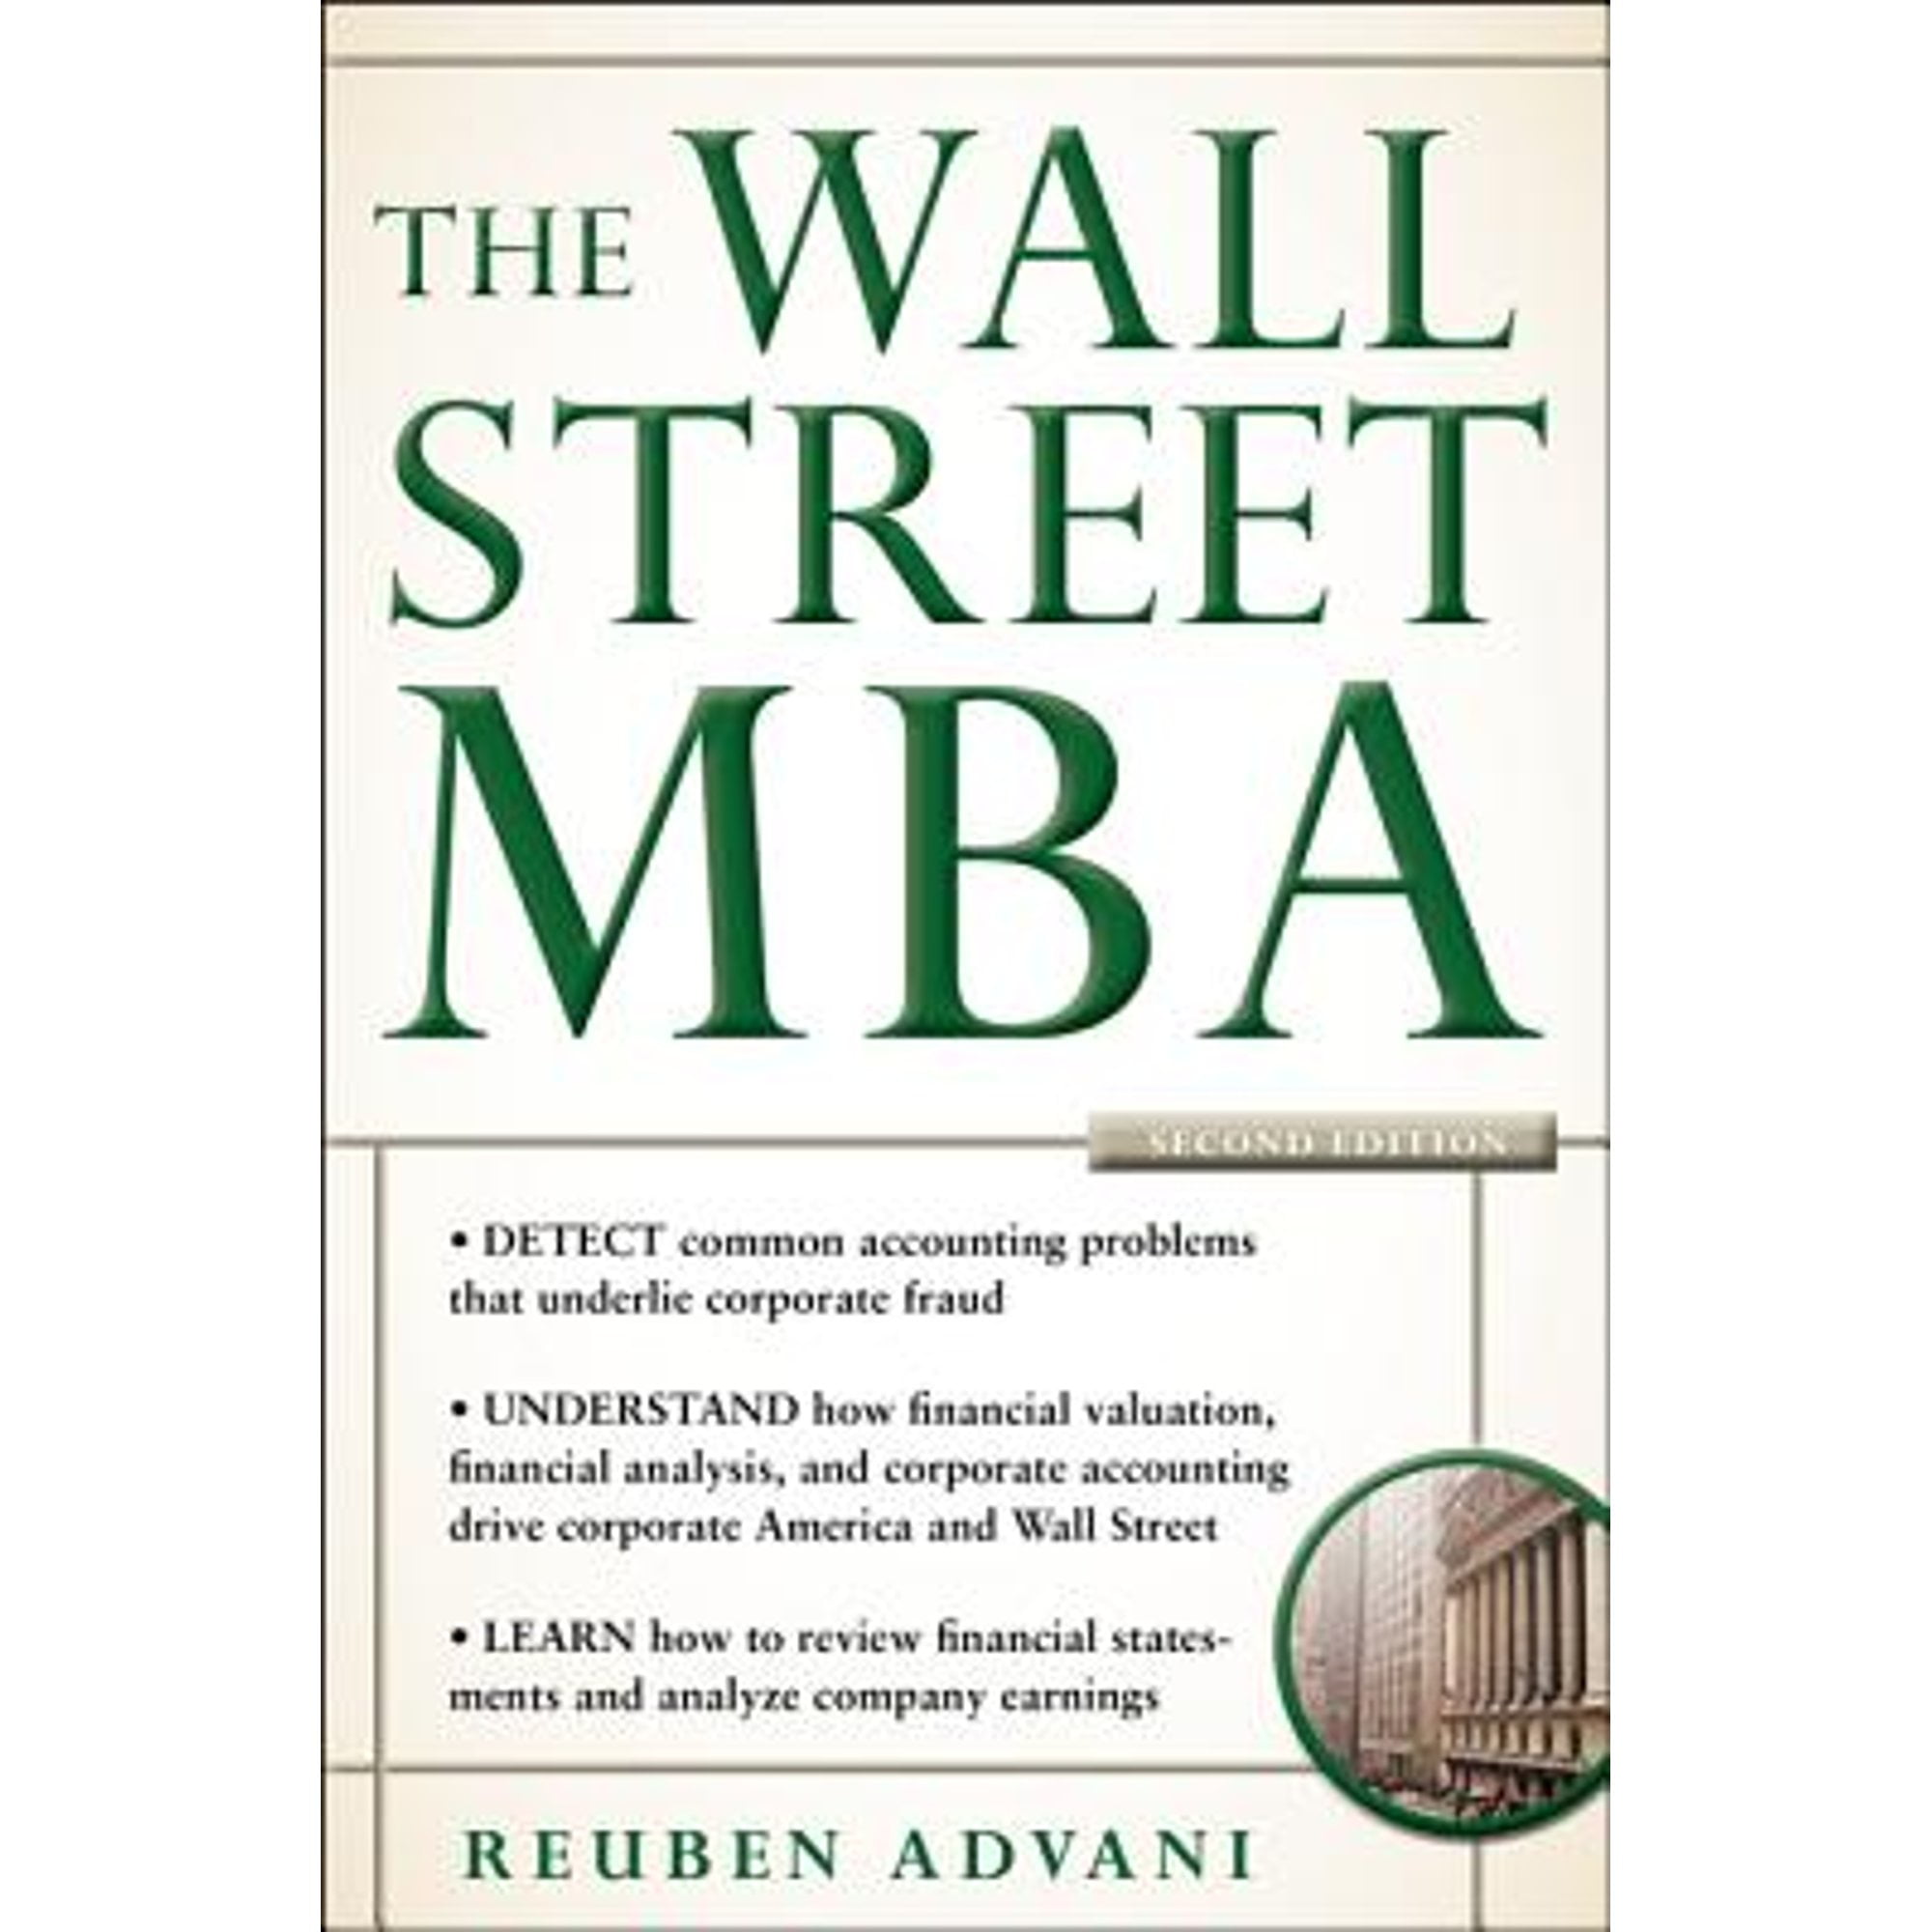 The Wall Street Mba, Second Edition (Edition 2) (Paperback)